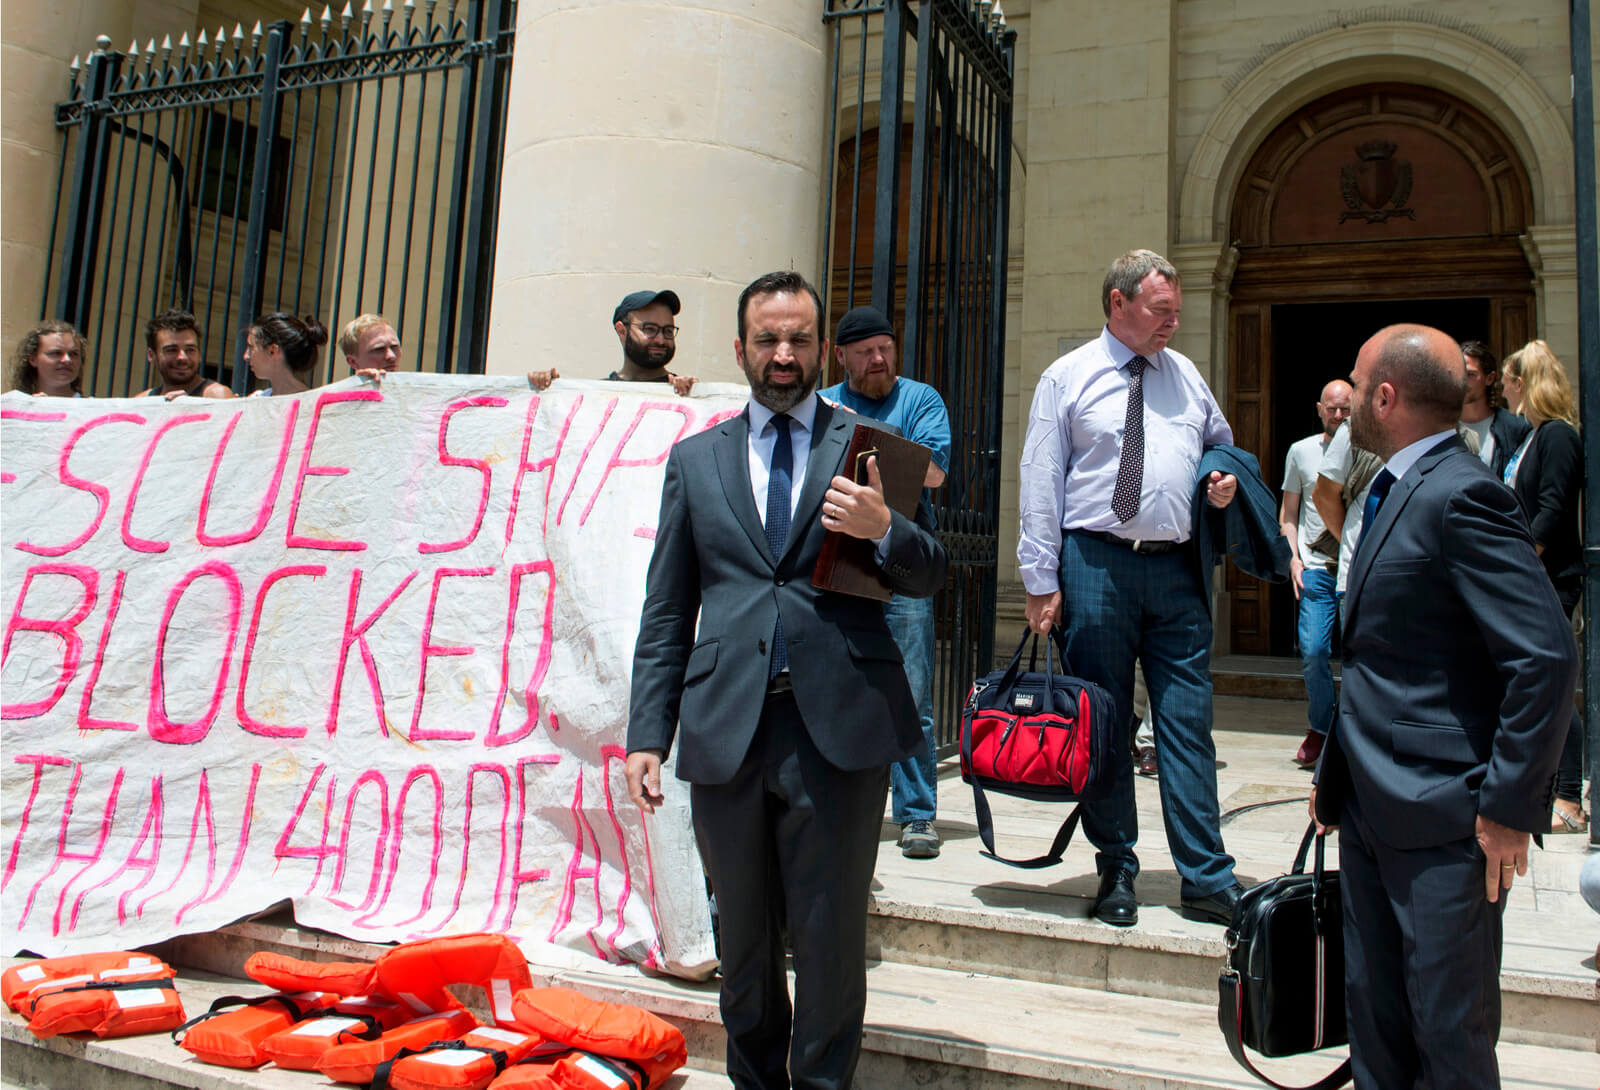 Claus-Peter Reisch, second from right, captain of Lifeline rescues ship, stops next to members of his crew staging a protest as he leaves after an arraignment hearing in Valletta, Malta, July 2, 2018. str | AP